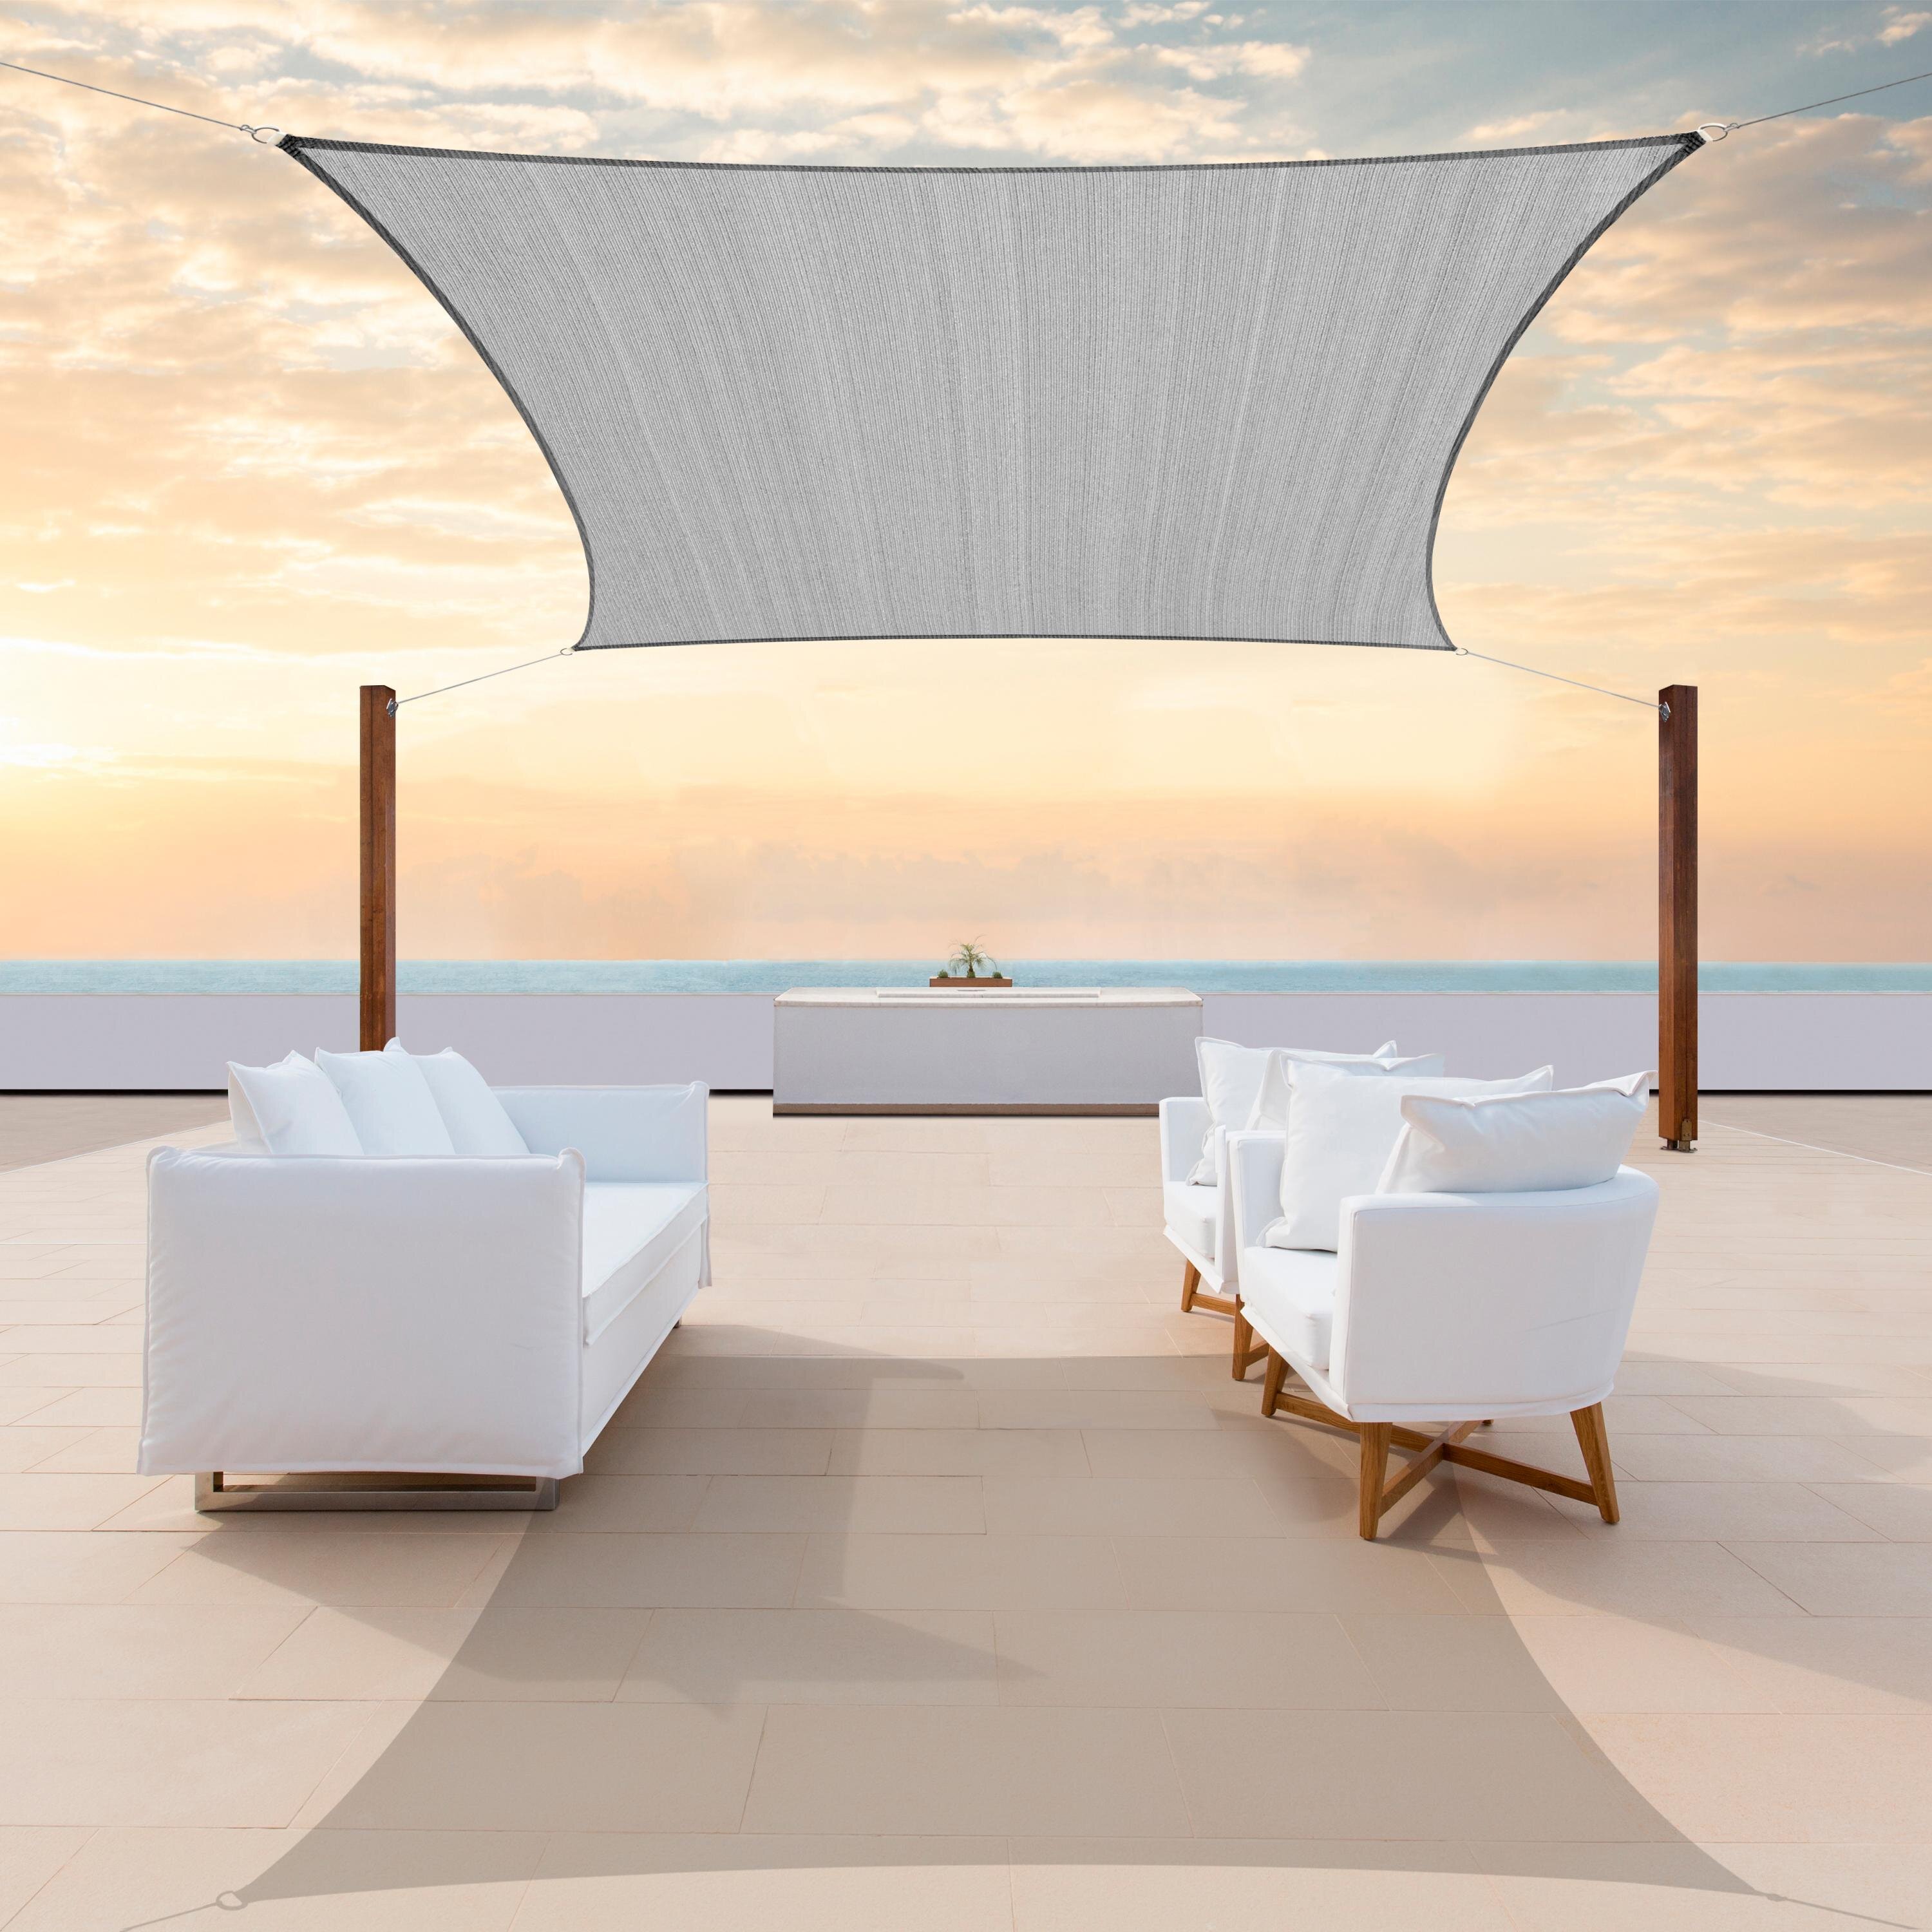 UV Block Canopy Awning Brown Cool Area 115 x 115 x 115 Triangle Sun Shade Sail for Patio Garden Outdoor 